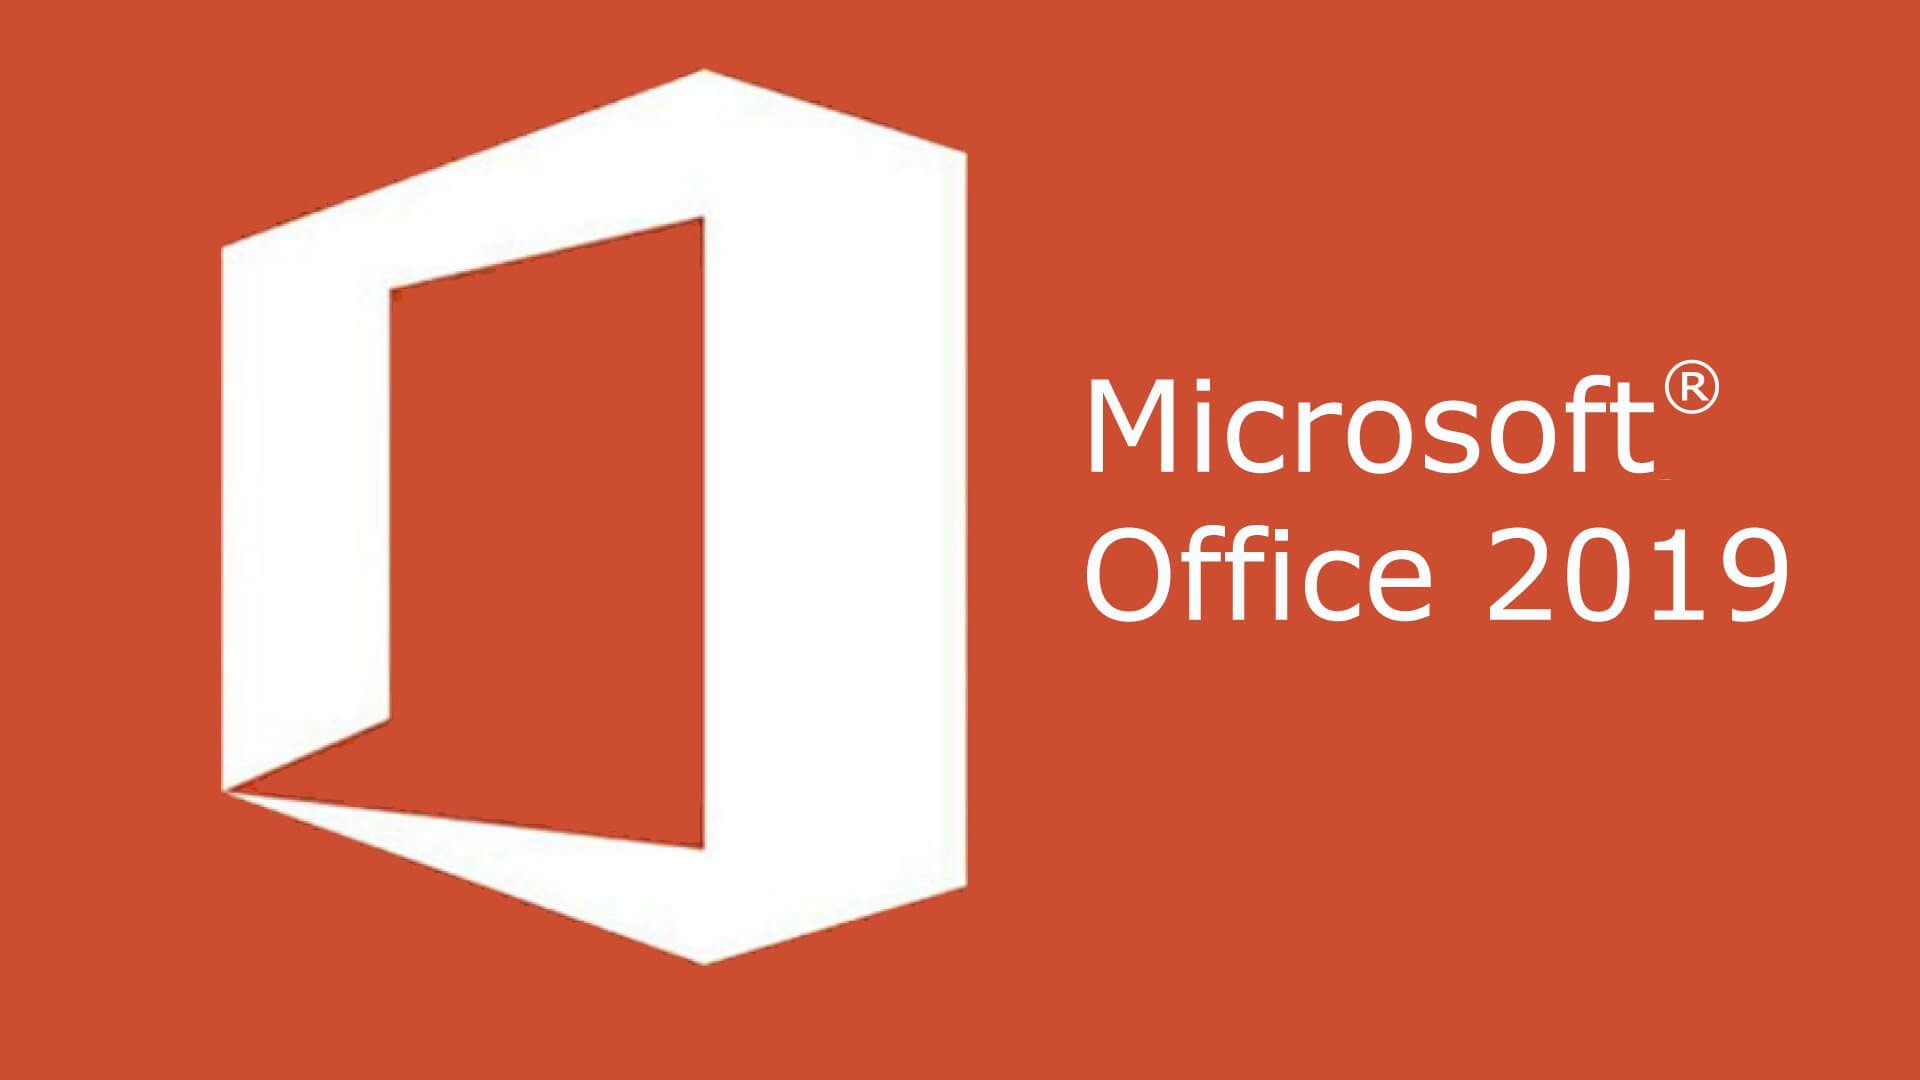 About Microsoft Office 2019